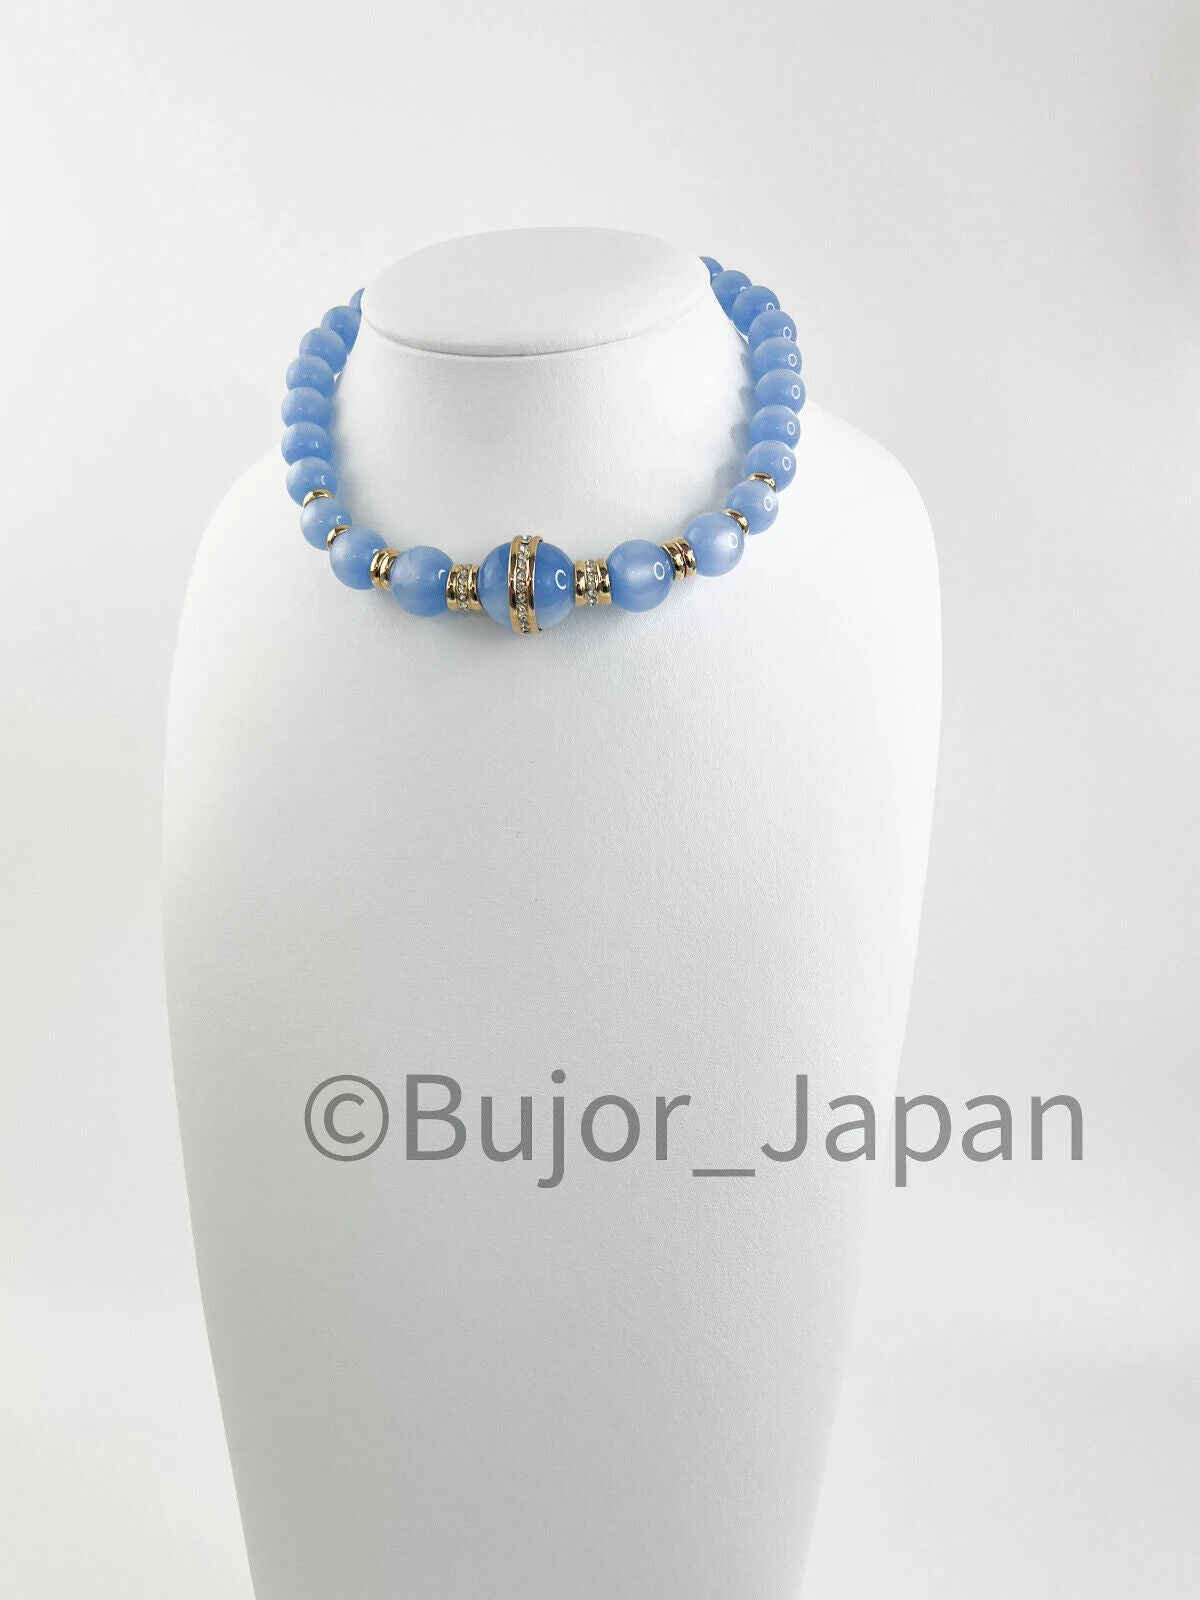 Givenchy Vintage necklace Blue Glass Lucite choker  beaded Rhinestone Gold  necklace choker, Chain Necklace, Gift for her, Jewelry for women